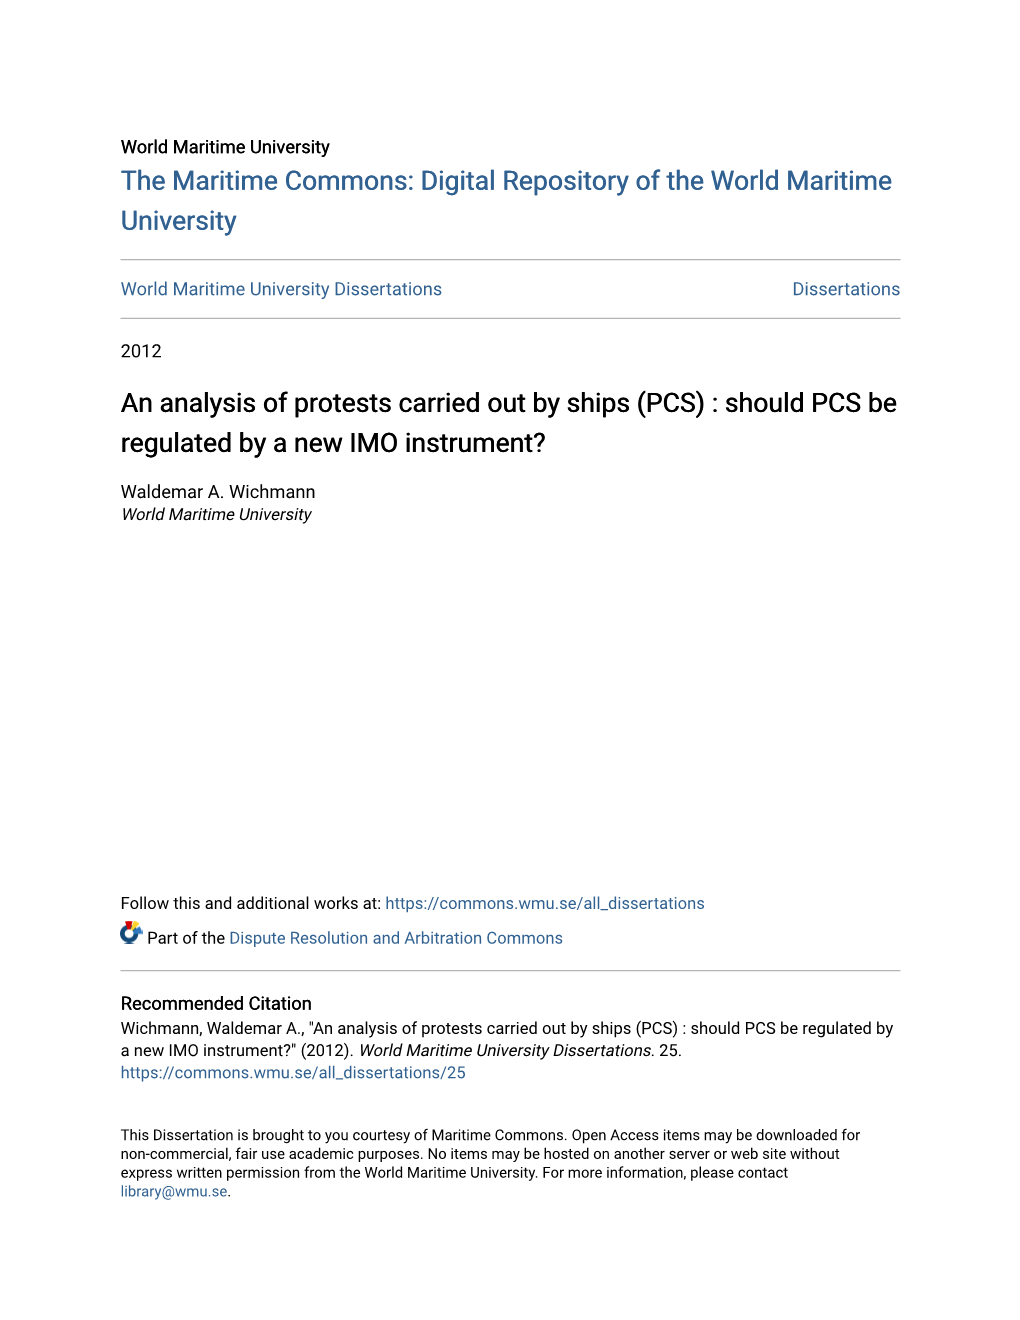 An Analysis of Protests Carried out by Ships (PCS) : Should PCS Be Regulated by a New IMO Instrument?